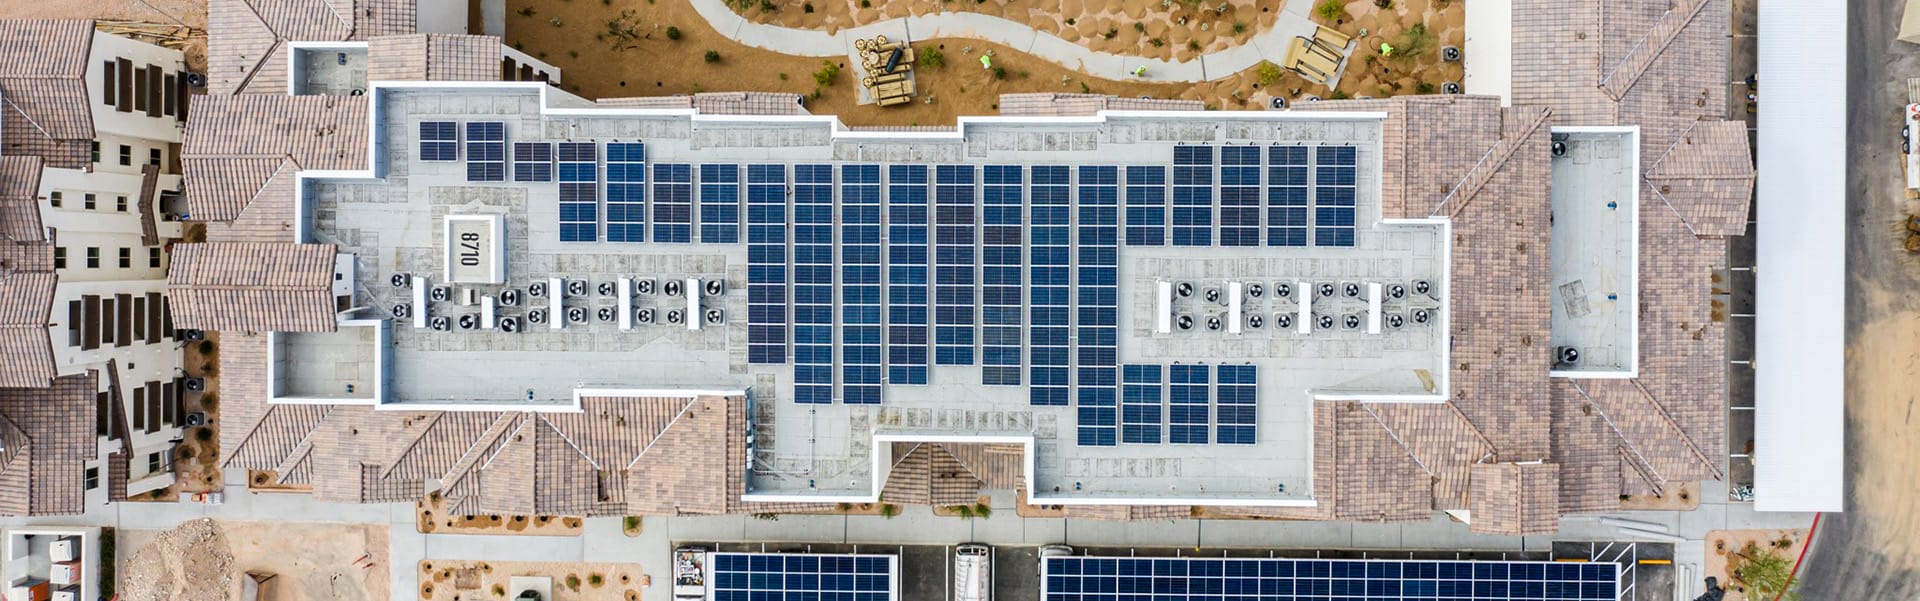 Drone photo of rooftop solar array